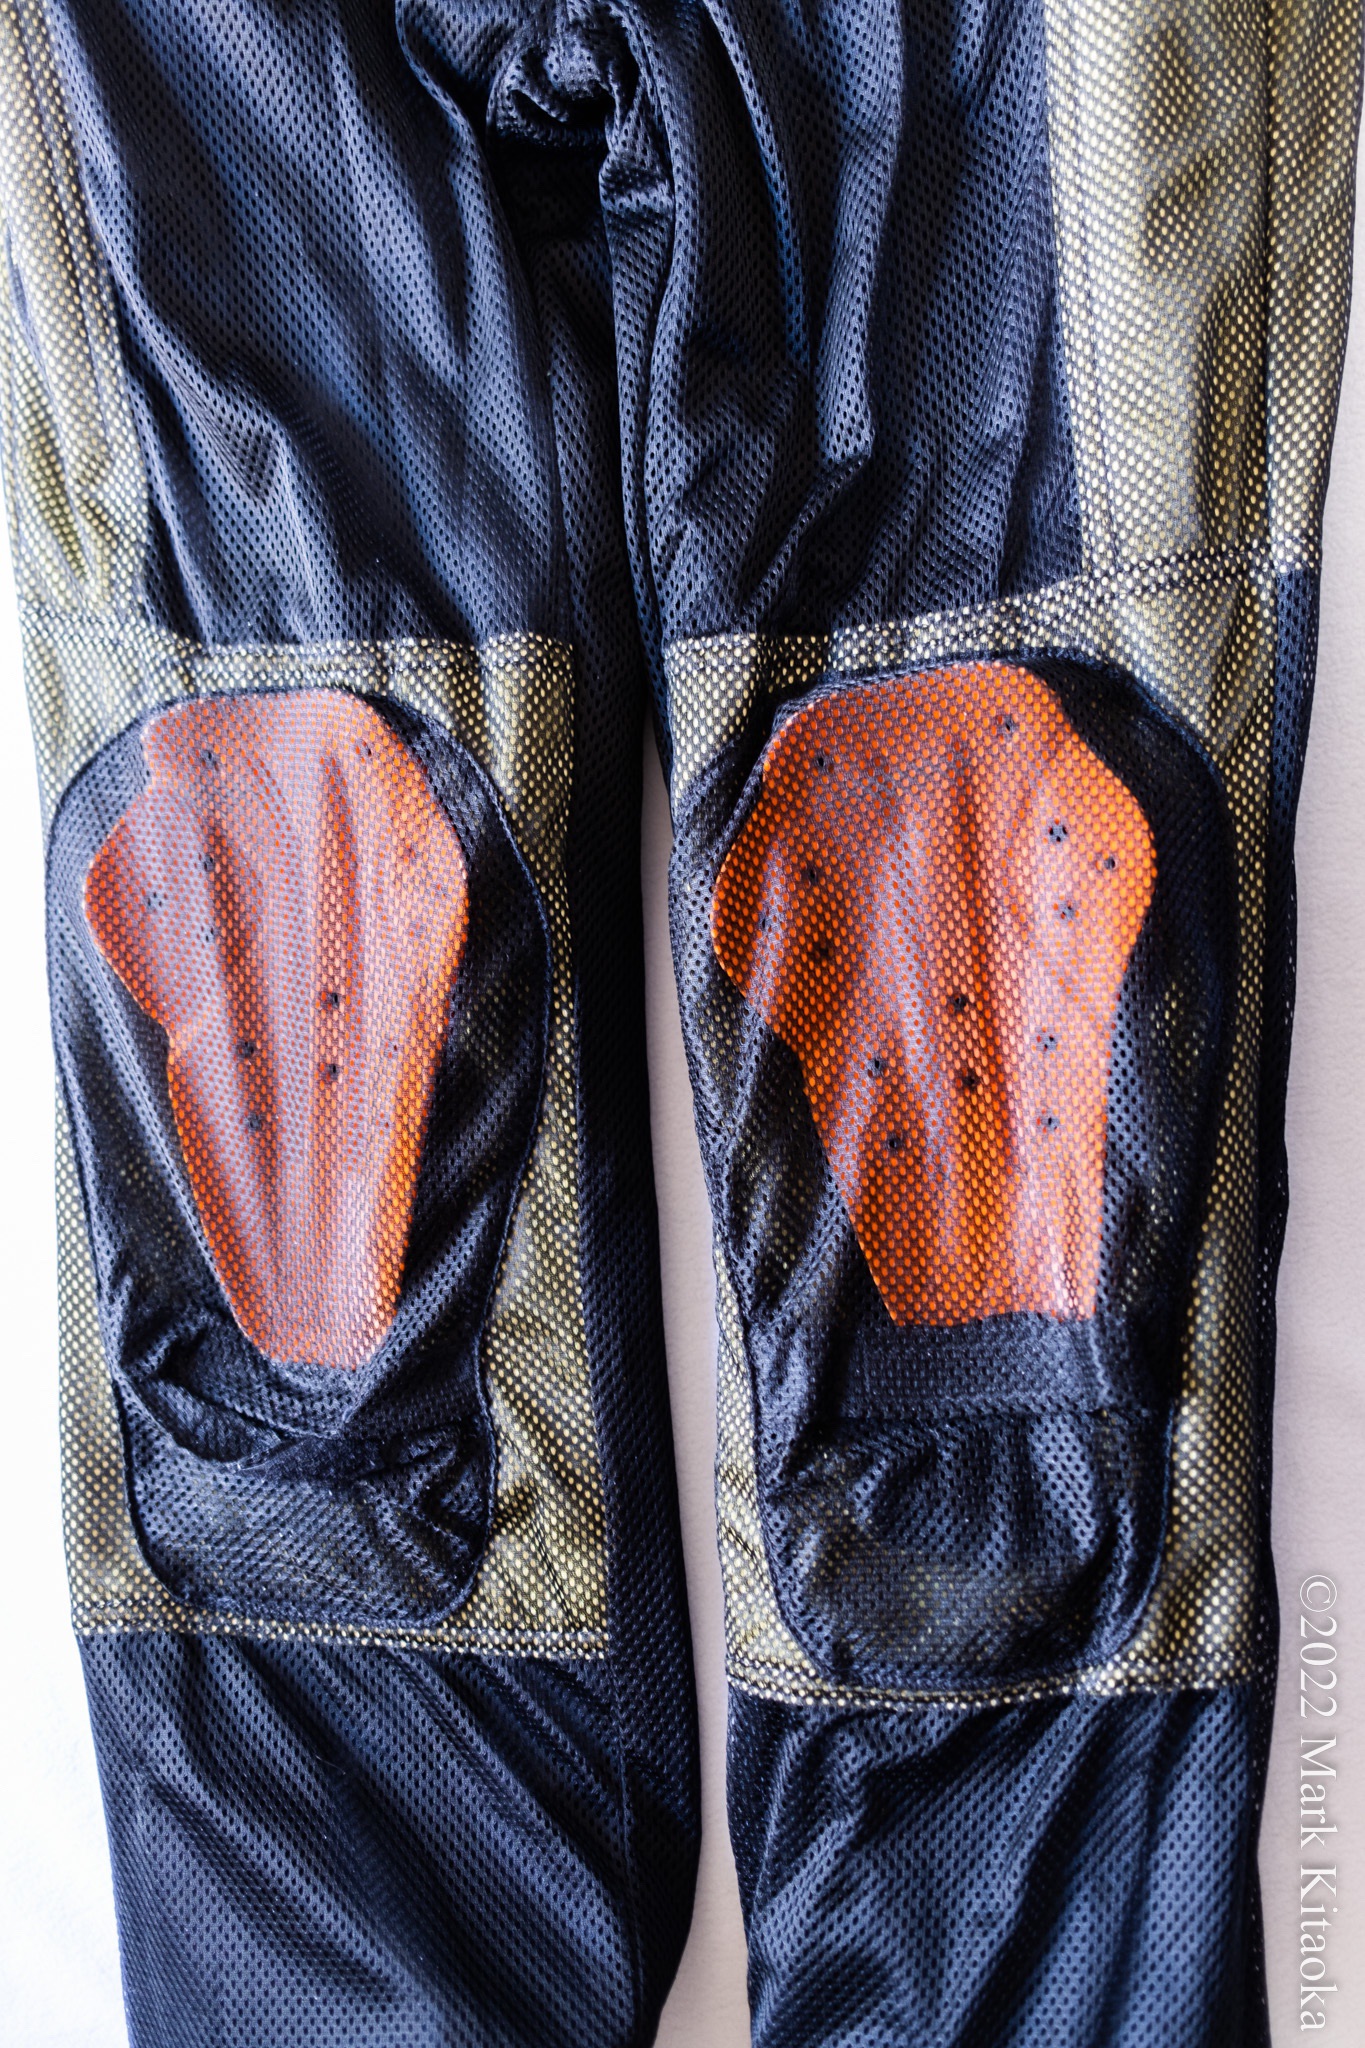 KLIM K Fifty 2 Pants inside out with armor inserted